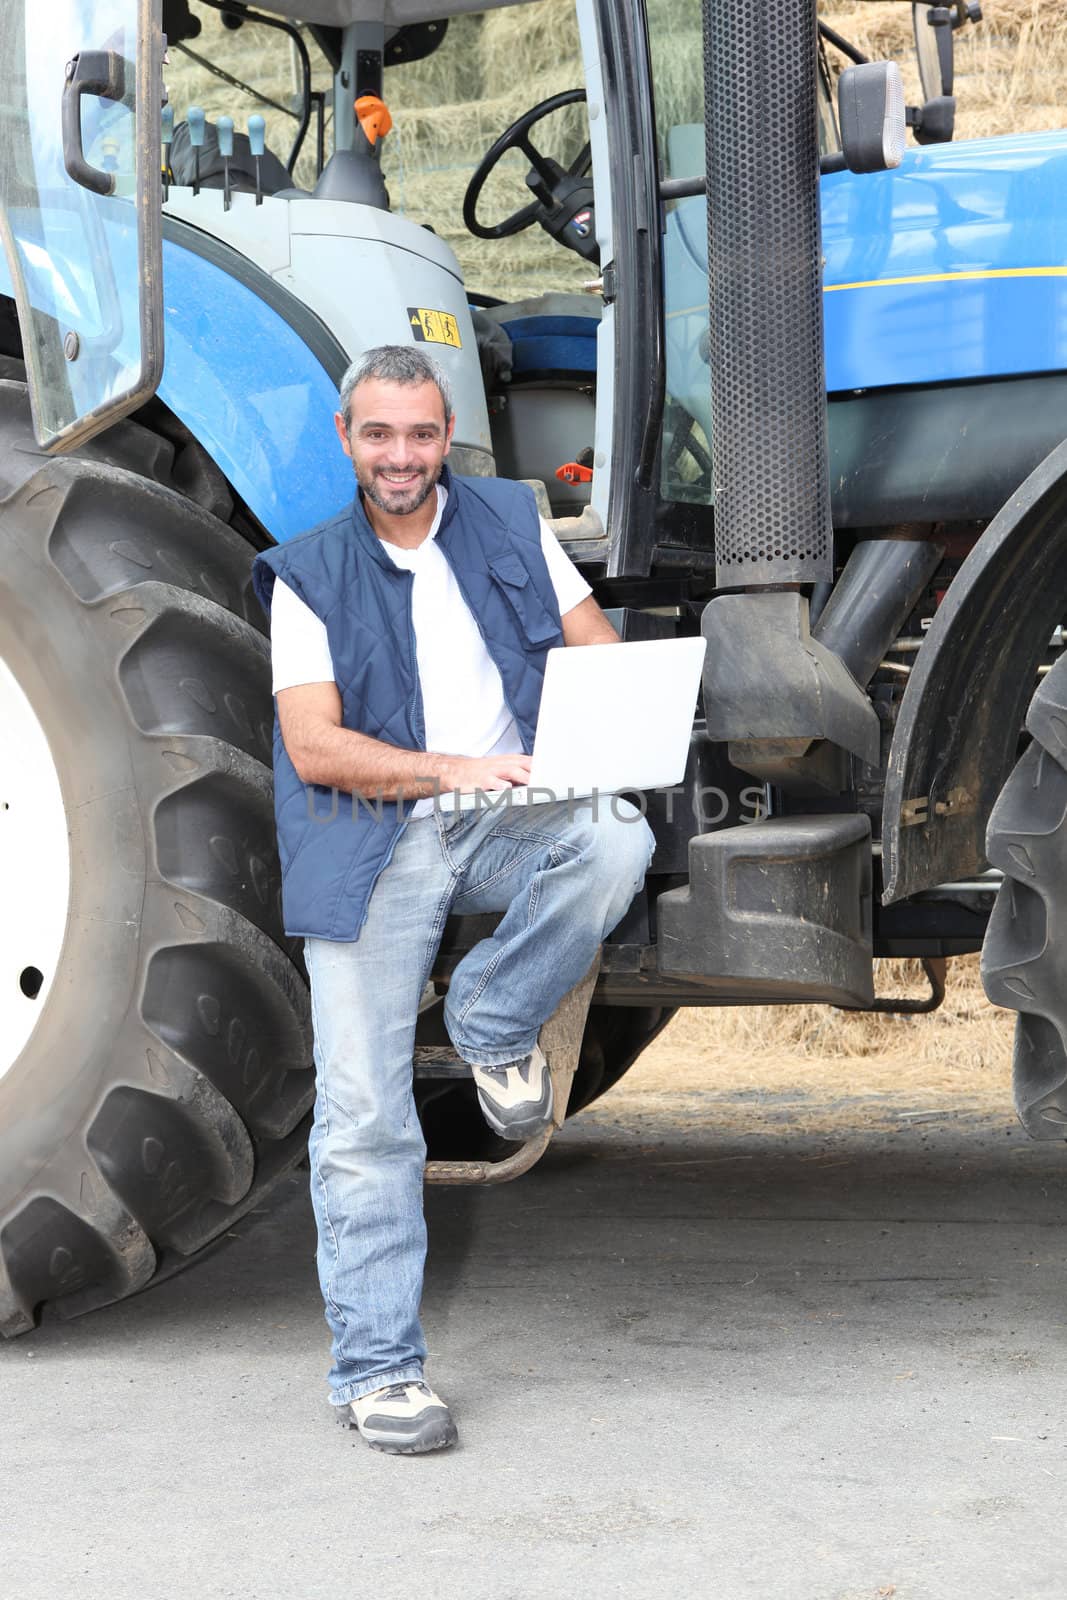 Famer with laptop computer stood by tractor by phovoir